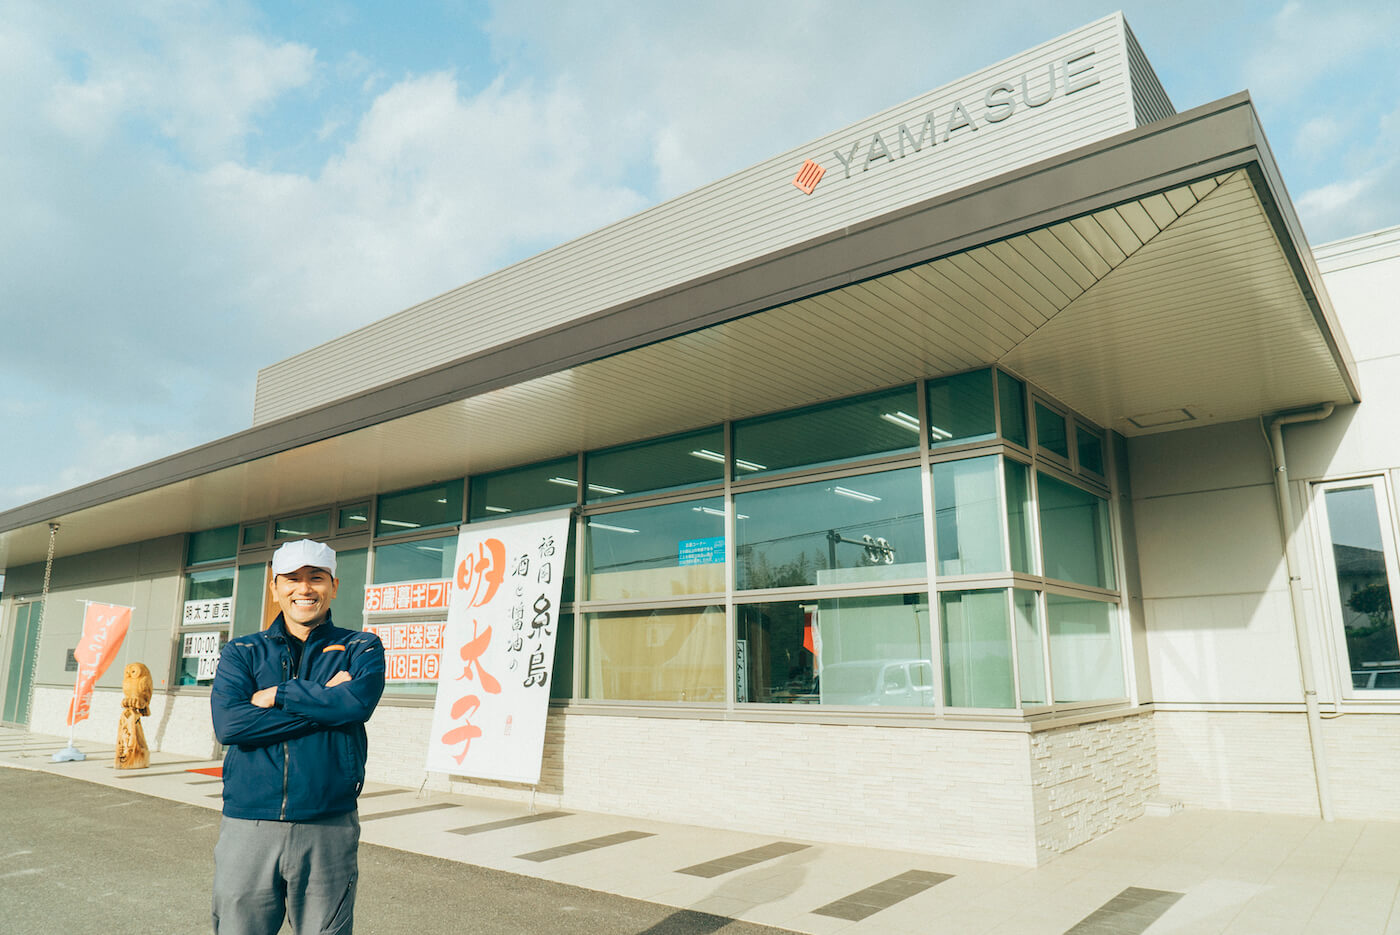 Takashi Baba - Creating a local trading company that enriches the lives of the people of Itoshima, 馬場孝志 – 糸島の人たちが潤う「糸島の地域商社」を目指して